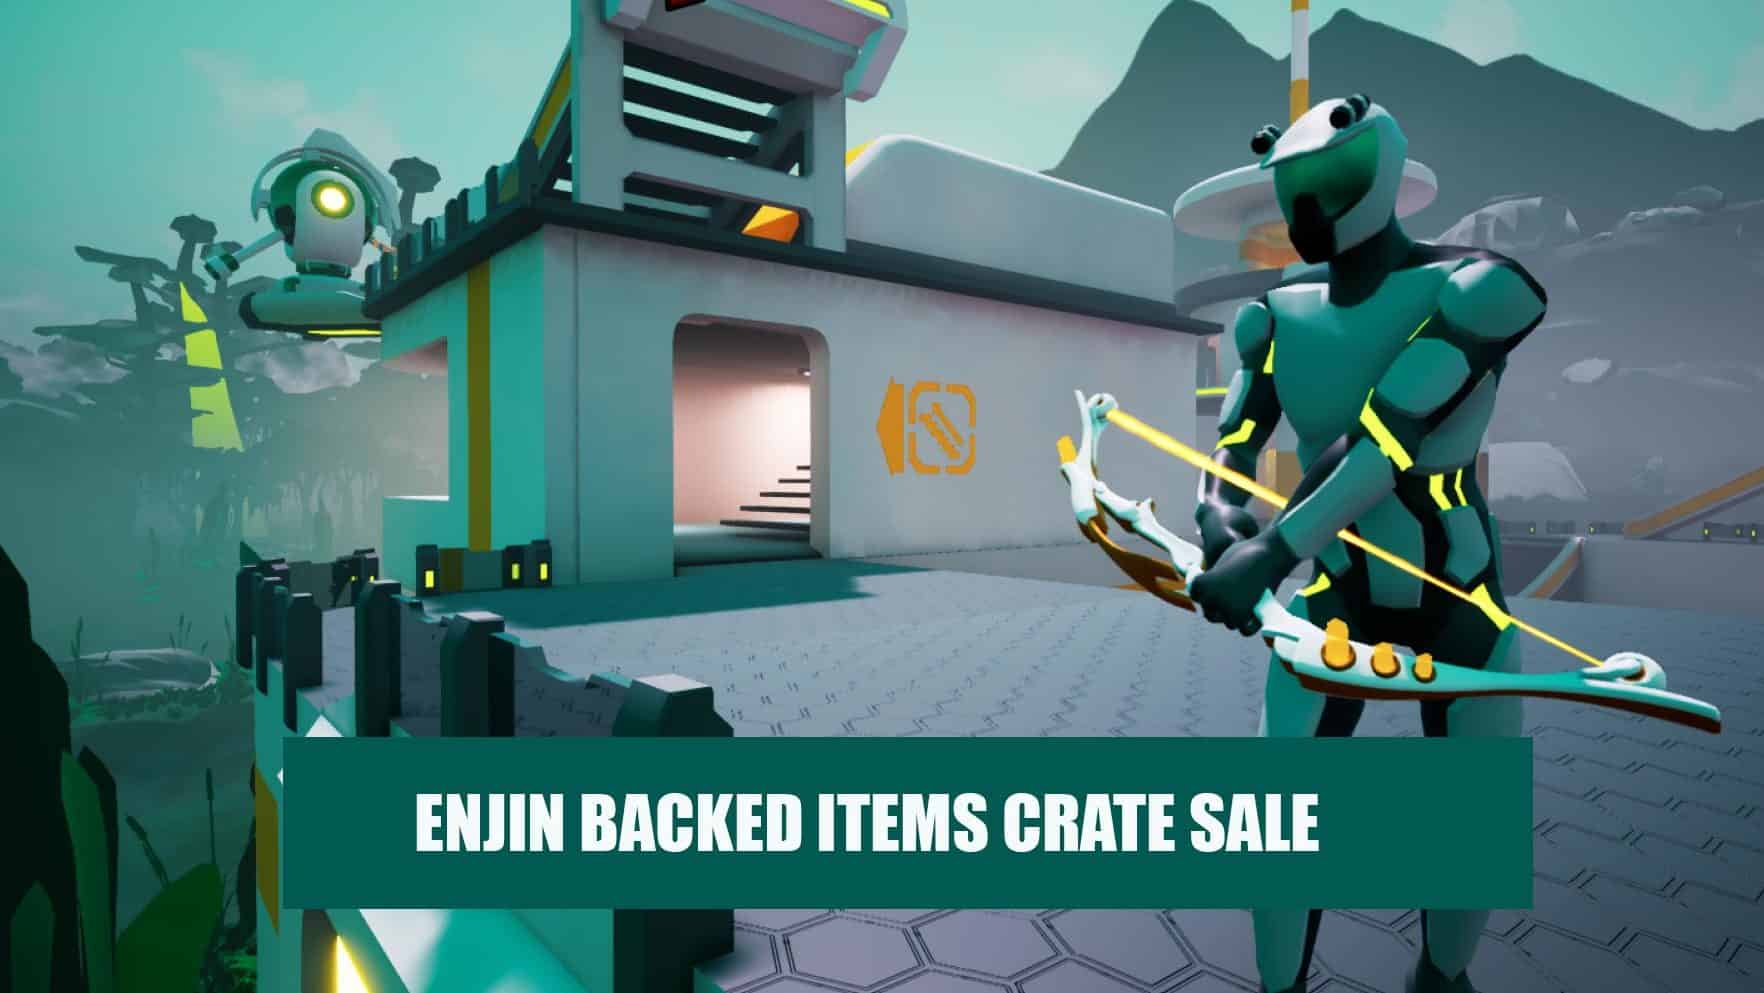 cropped ContainmentCorps Blockchain Enjin Games Crypto Steam egamersio Containment Corps, the Multiverse tower defense game is hosting their presale which you can participate right away and of course, play for free on the Steam Platform. The game combines first-person action with co-operative strategy and tower defense elements.